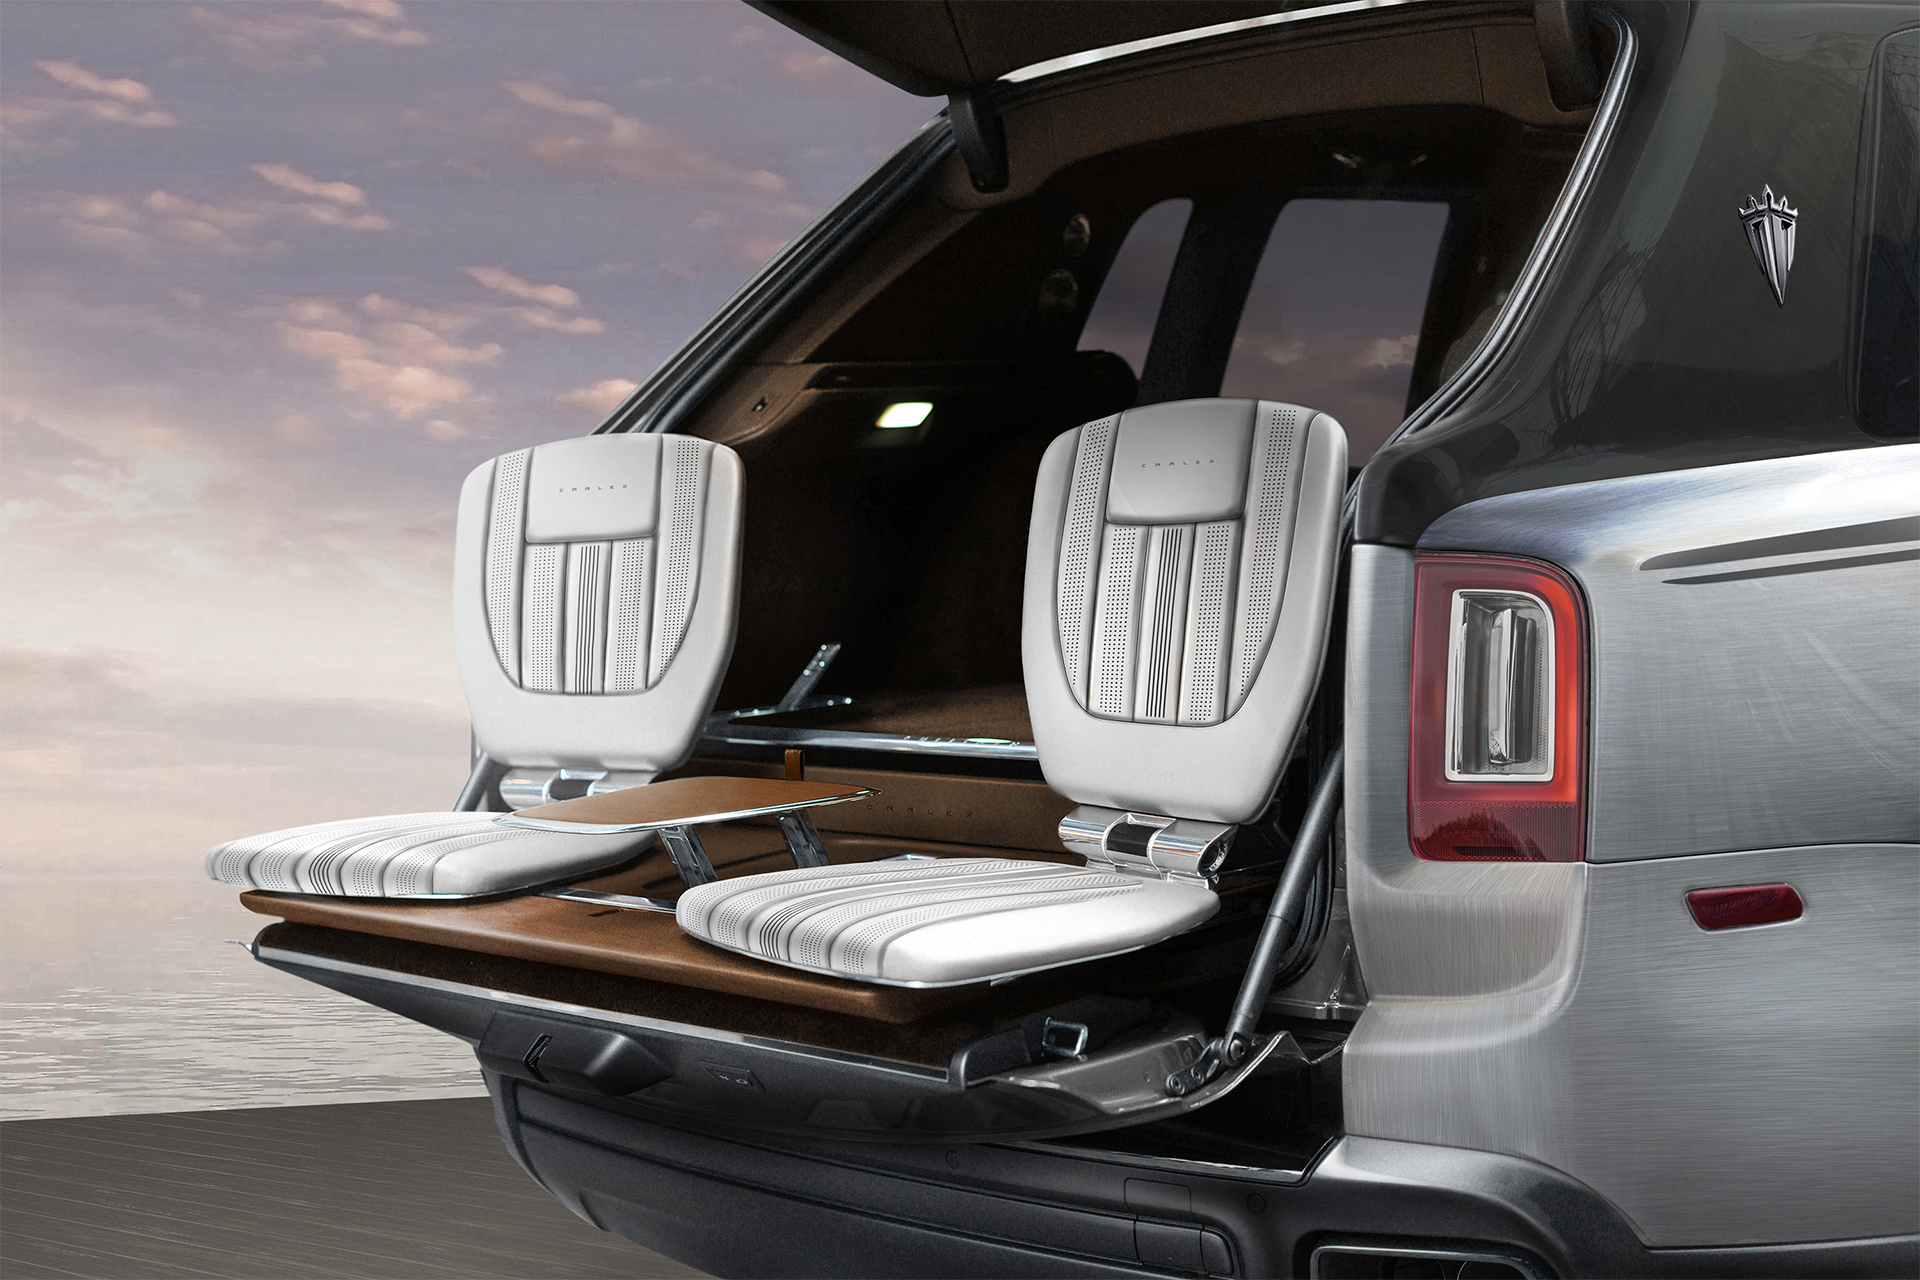 Carlex Design Goes Yachting With Its New Rolls-Royce Cullinan